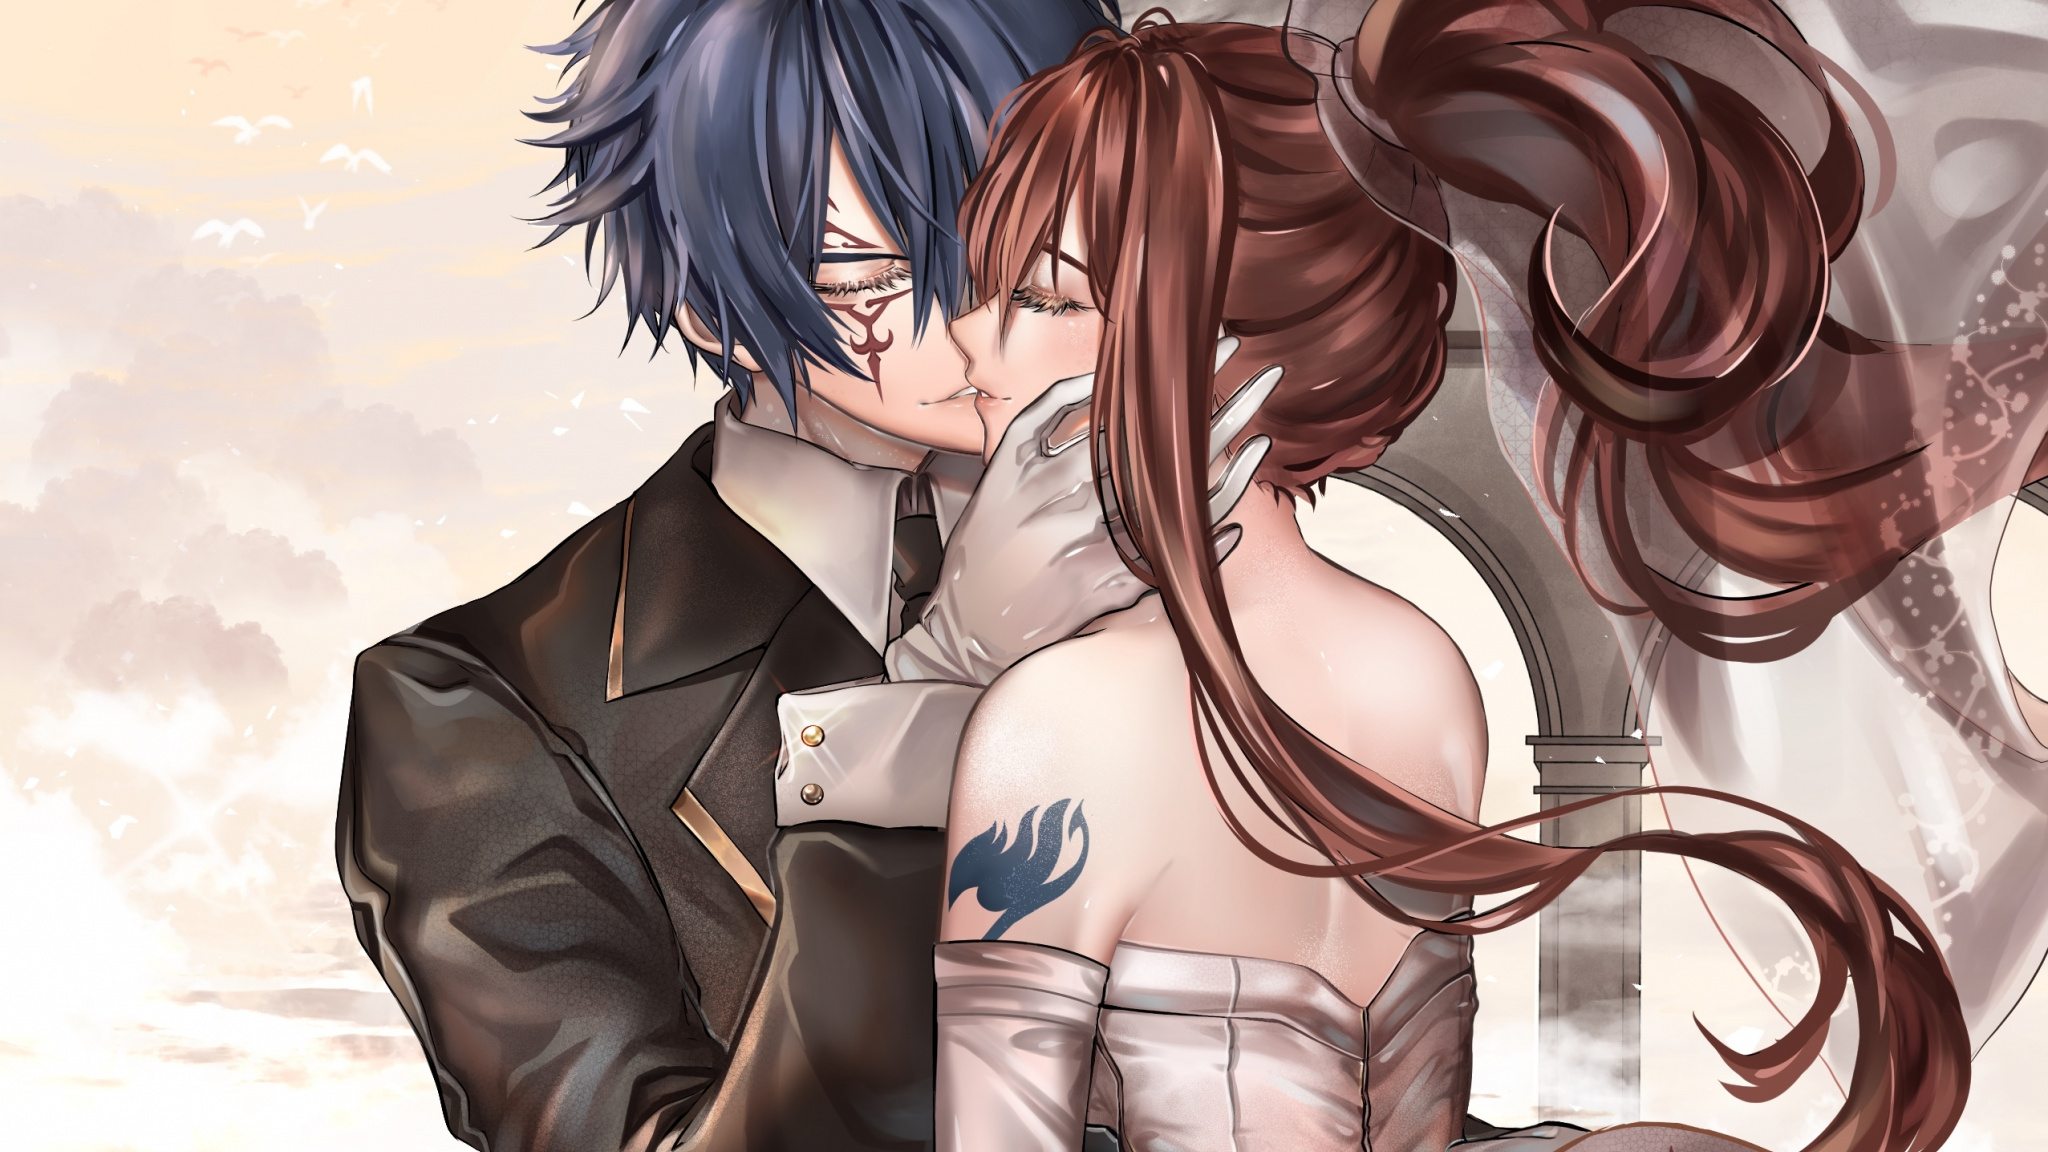 Download Anime, couple, kiss, love, Erza Scarlet, Jellal Fernandes, Fairy Tail wallpaper, 2048x Dual Wide, Widescreen